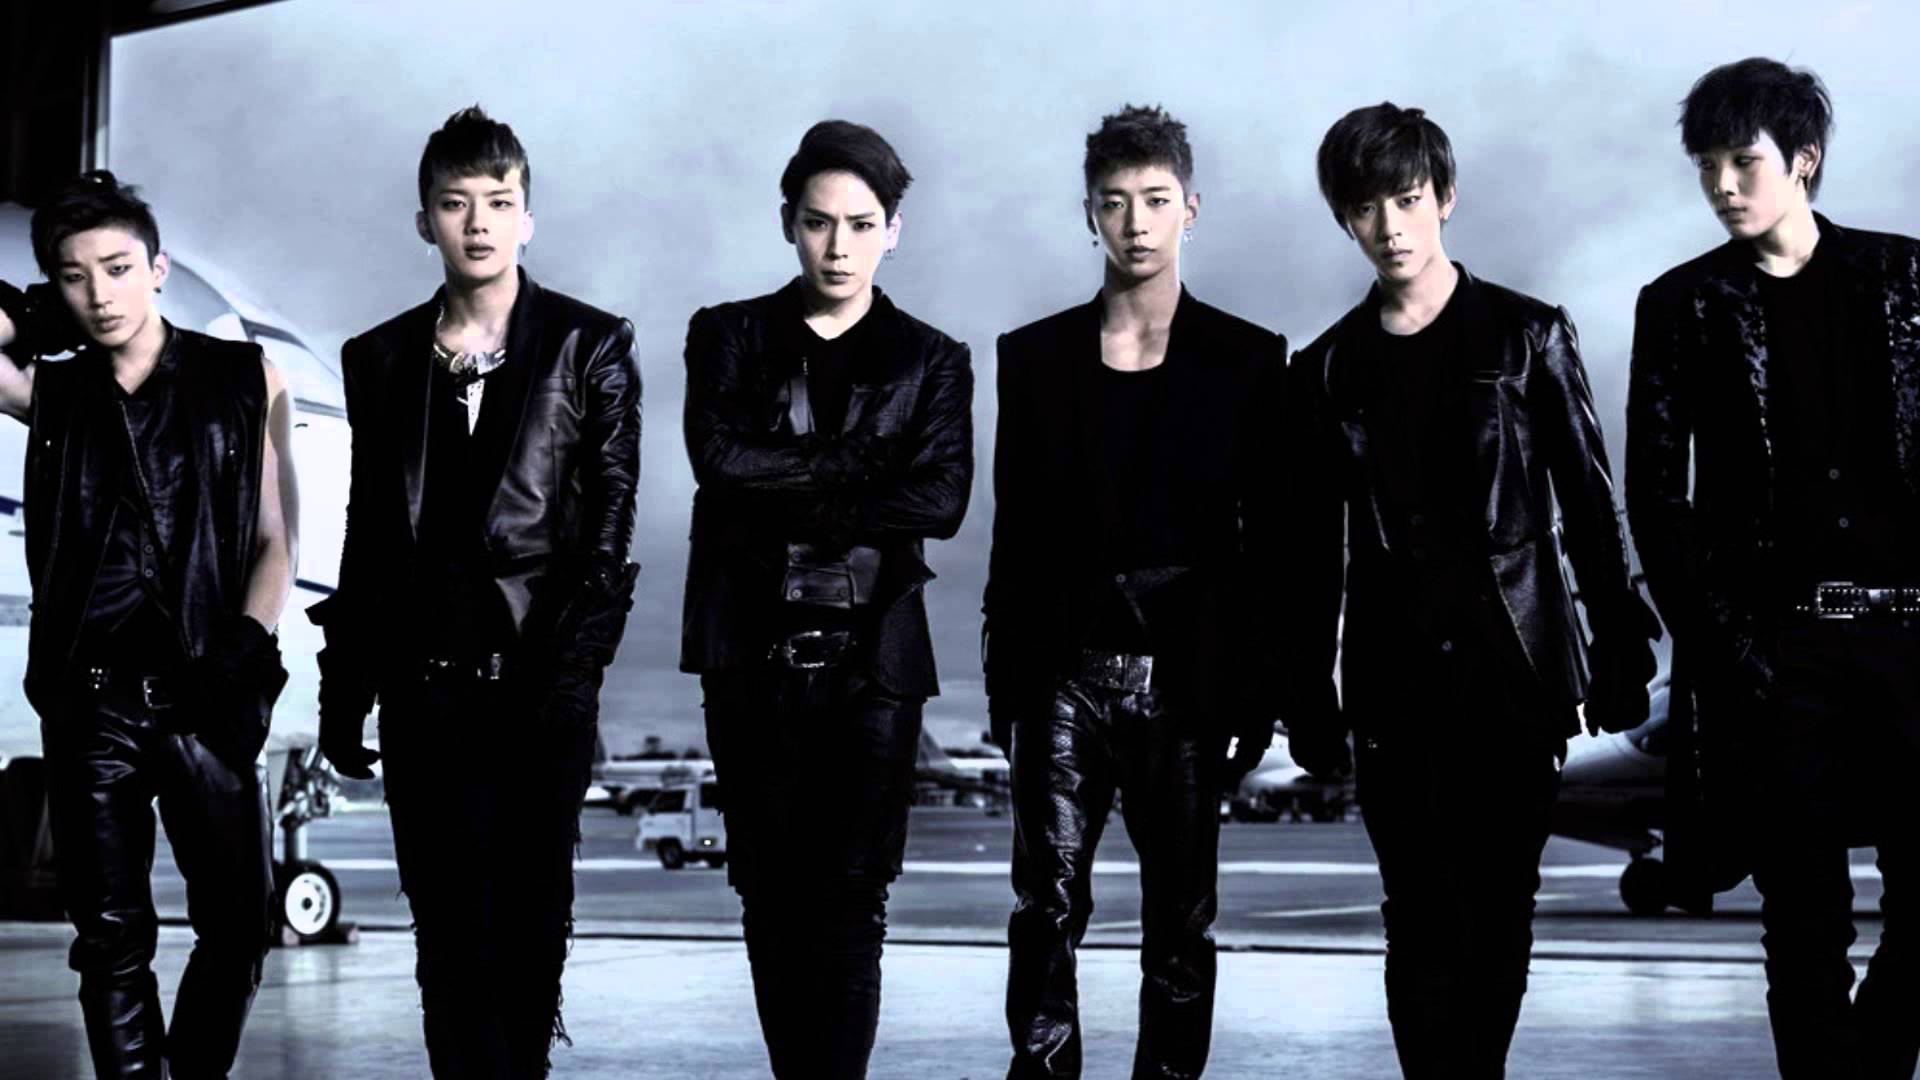 Wallpaper Blink of B.A.P Wallpaper HD for Android, Windows